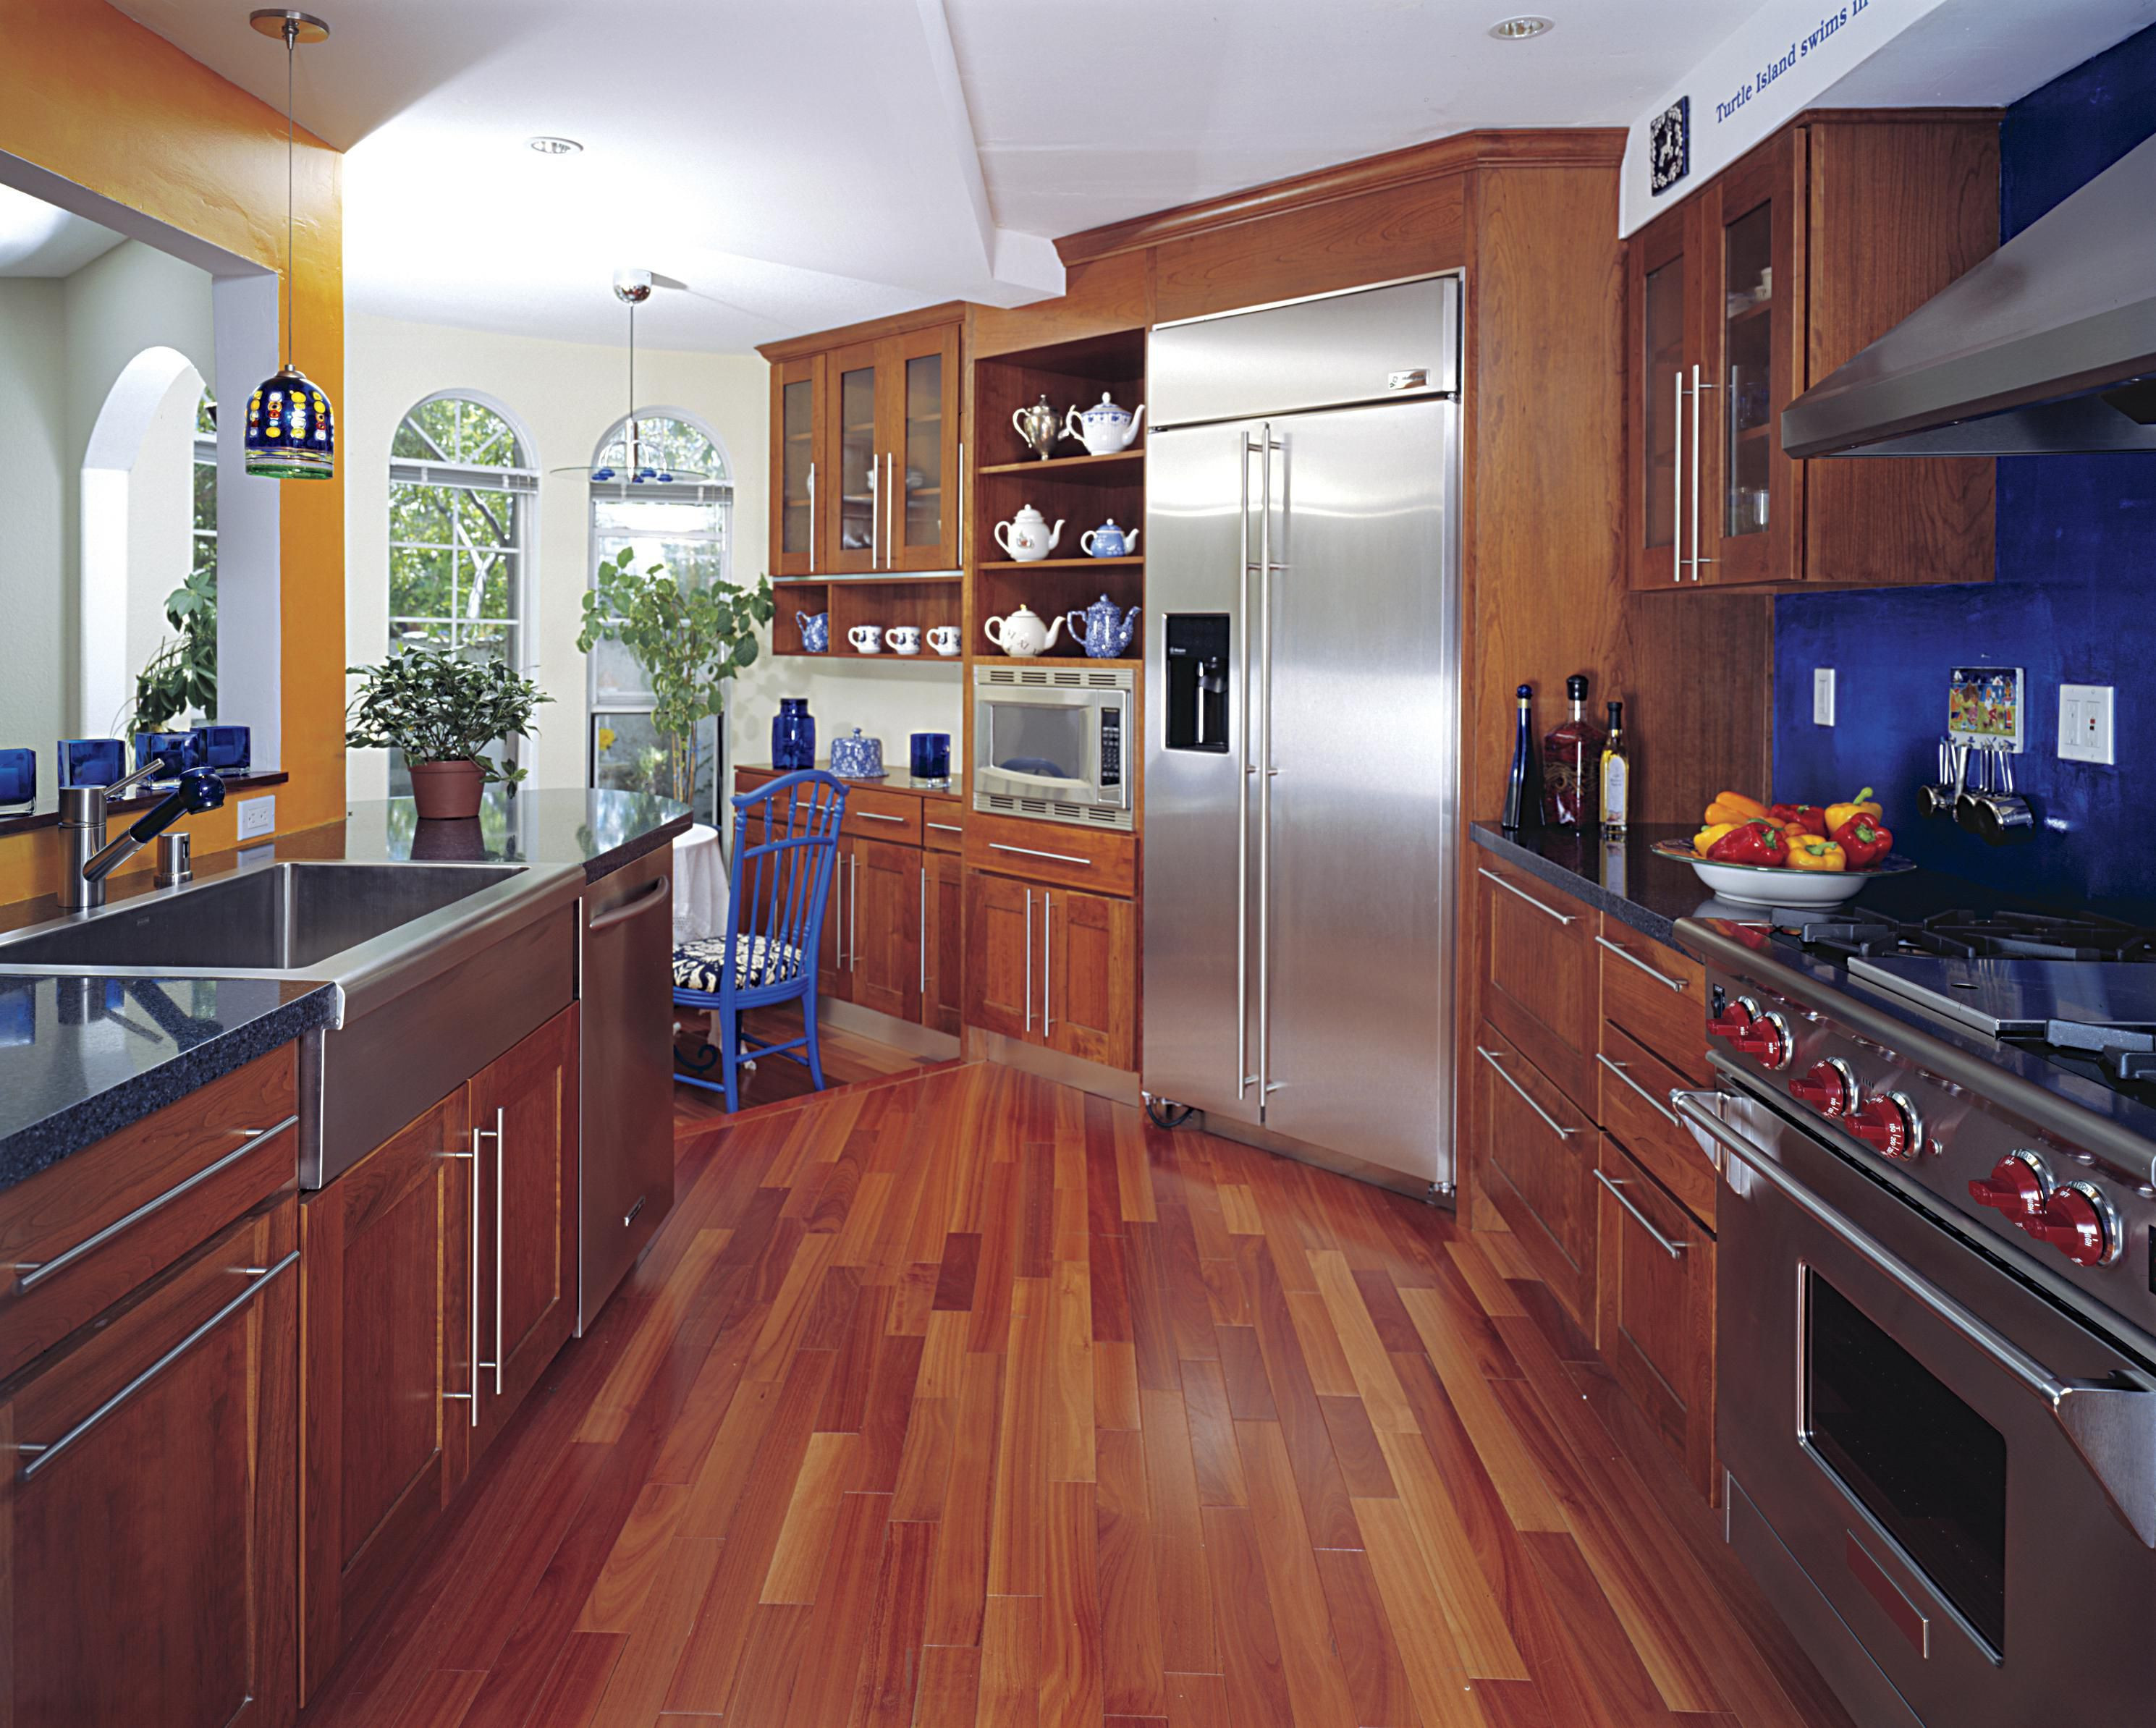 15 Great Hardwood Floor Ideas Styles 2024 free download hardwood floor ideas styles of hardwood floor in a kitchen is this allowed throughout 186828472 56a49f3a5f9b58b7d0d7e142